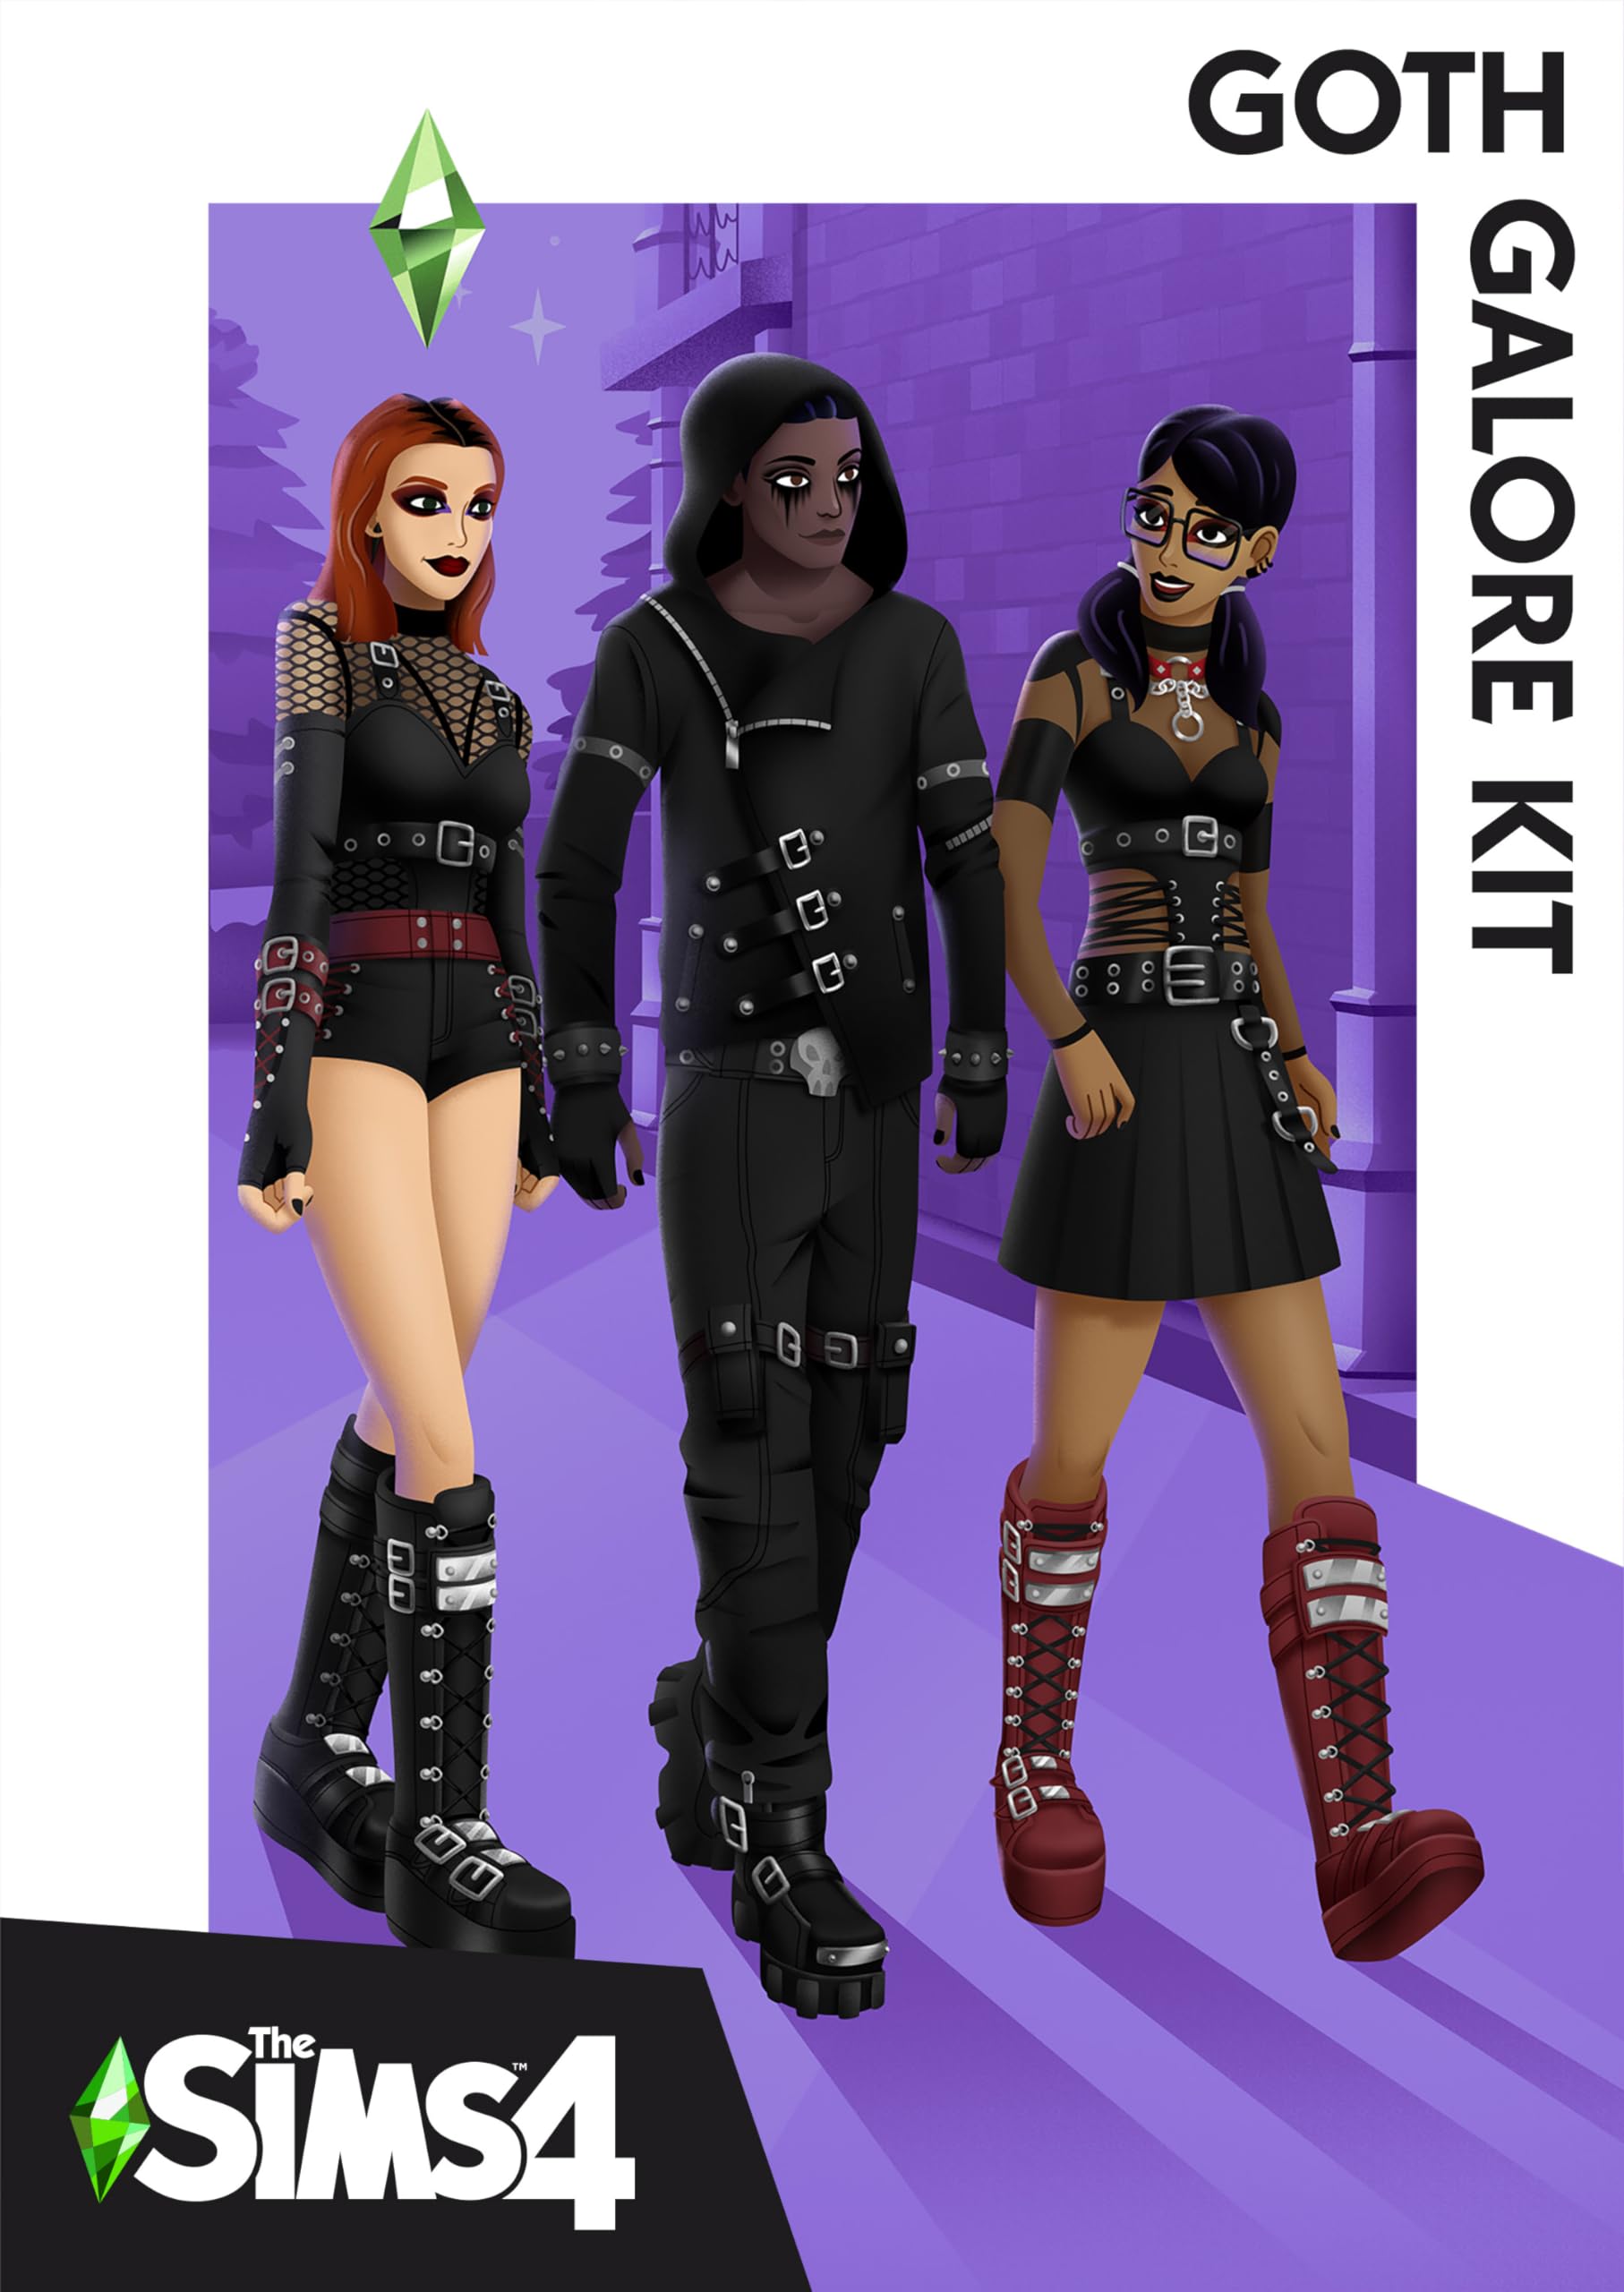 The Sims 4 - Goth Galore Kit - PC [Online Game Code]